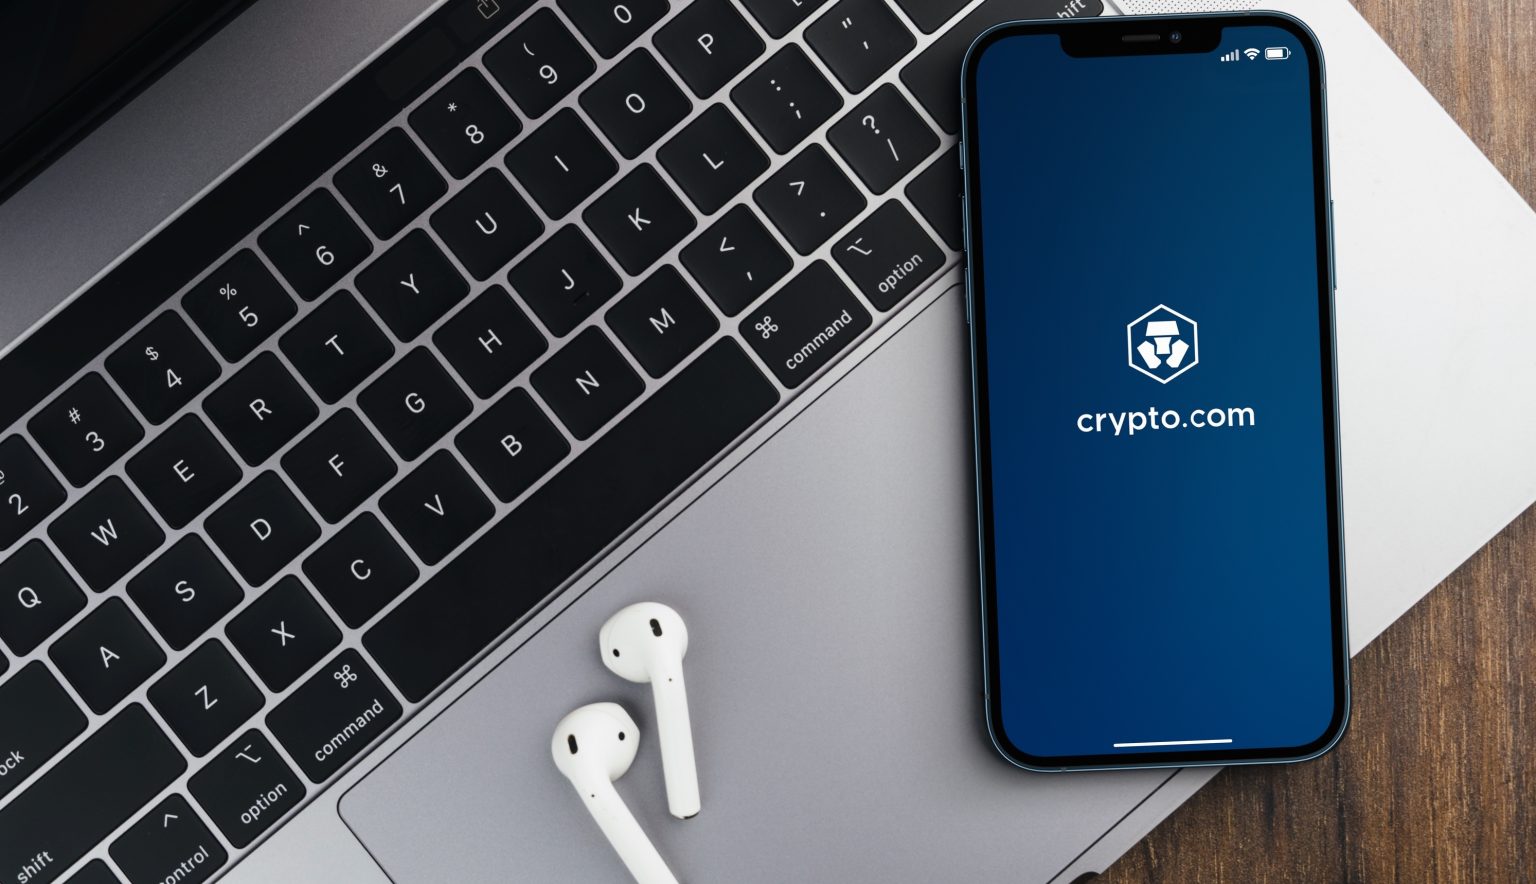 How Crypto.com Verifies Users Without Compromising a Convenient Experience